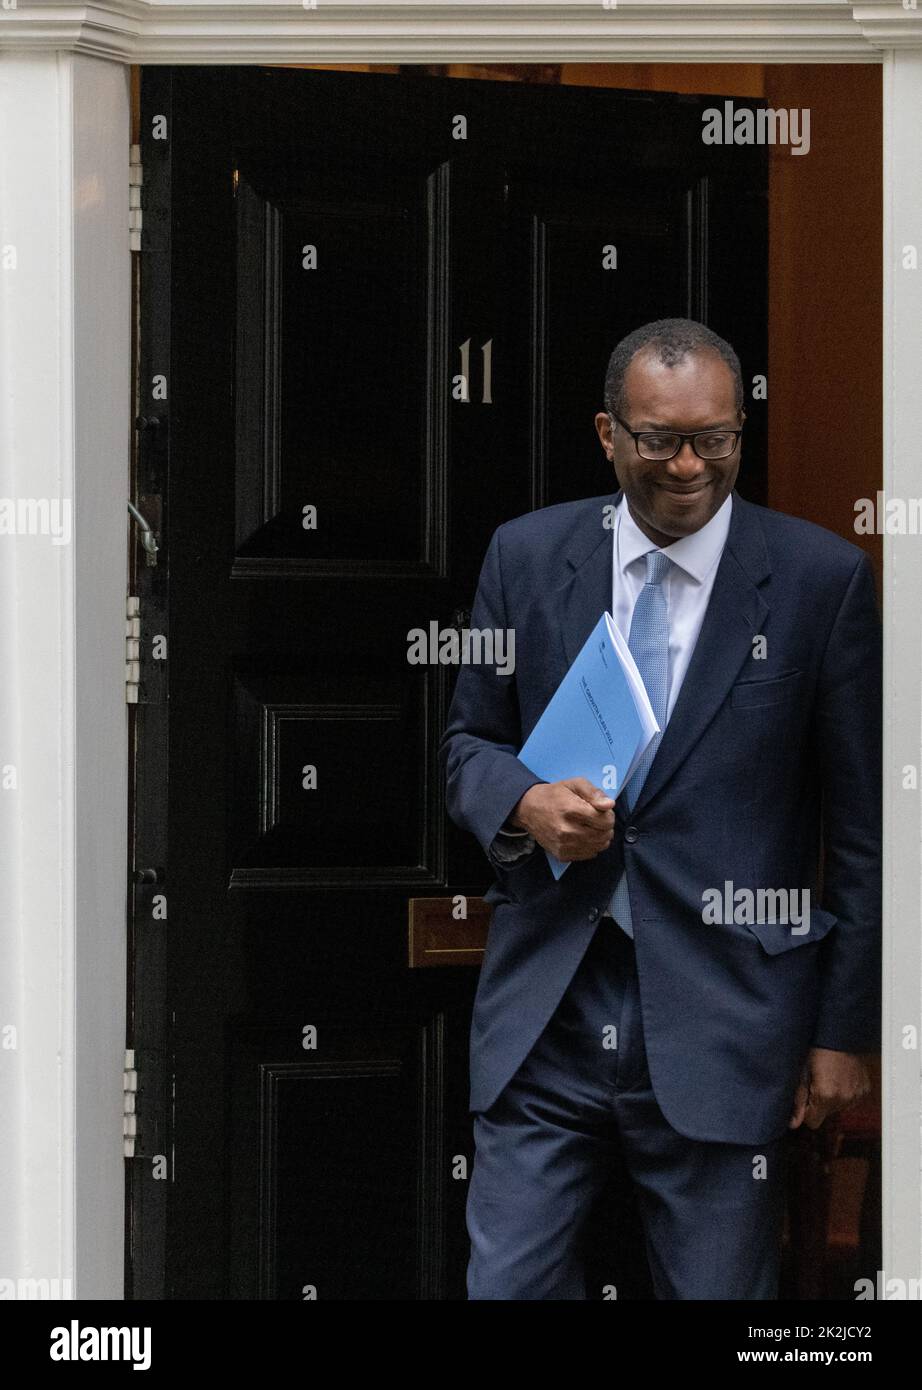 London, UK. 23rd Sep, 2022. Kwasi Kwarteng, Chancellor of the Exchequer, leaves no. 11 Downing Street to present his financial statement, 'mini budget' Credit: Ian Davidson/Alamy Live News Stock Photo